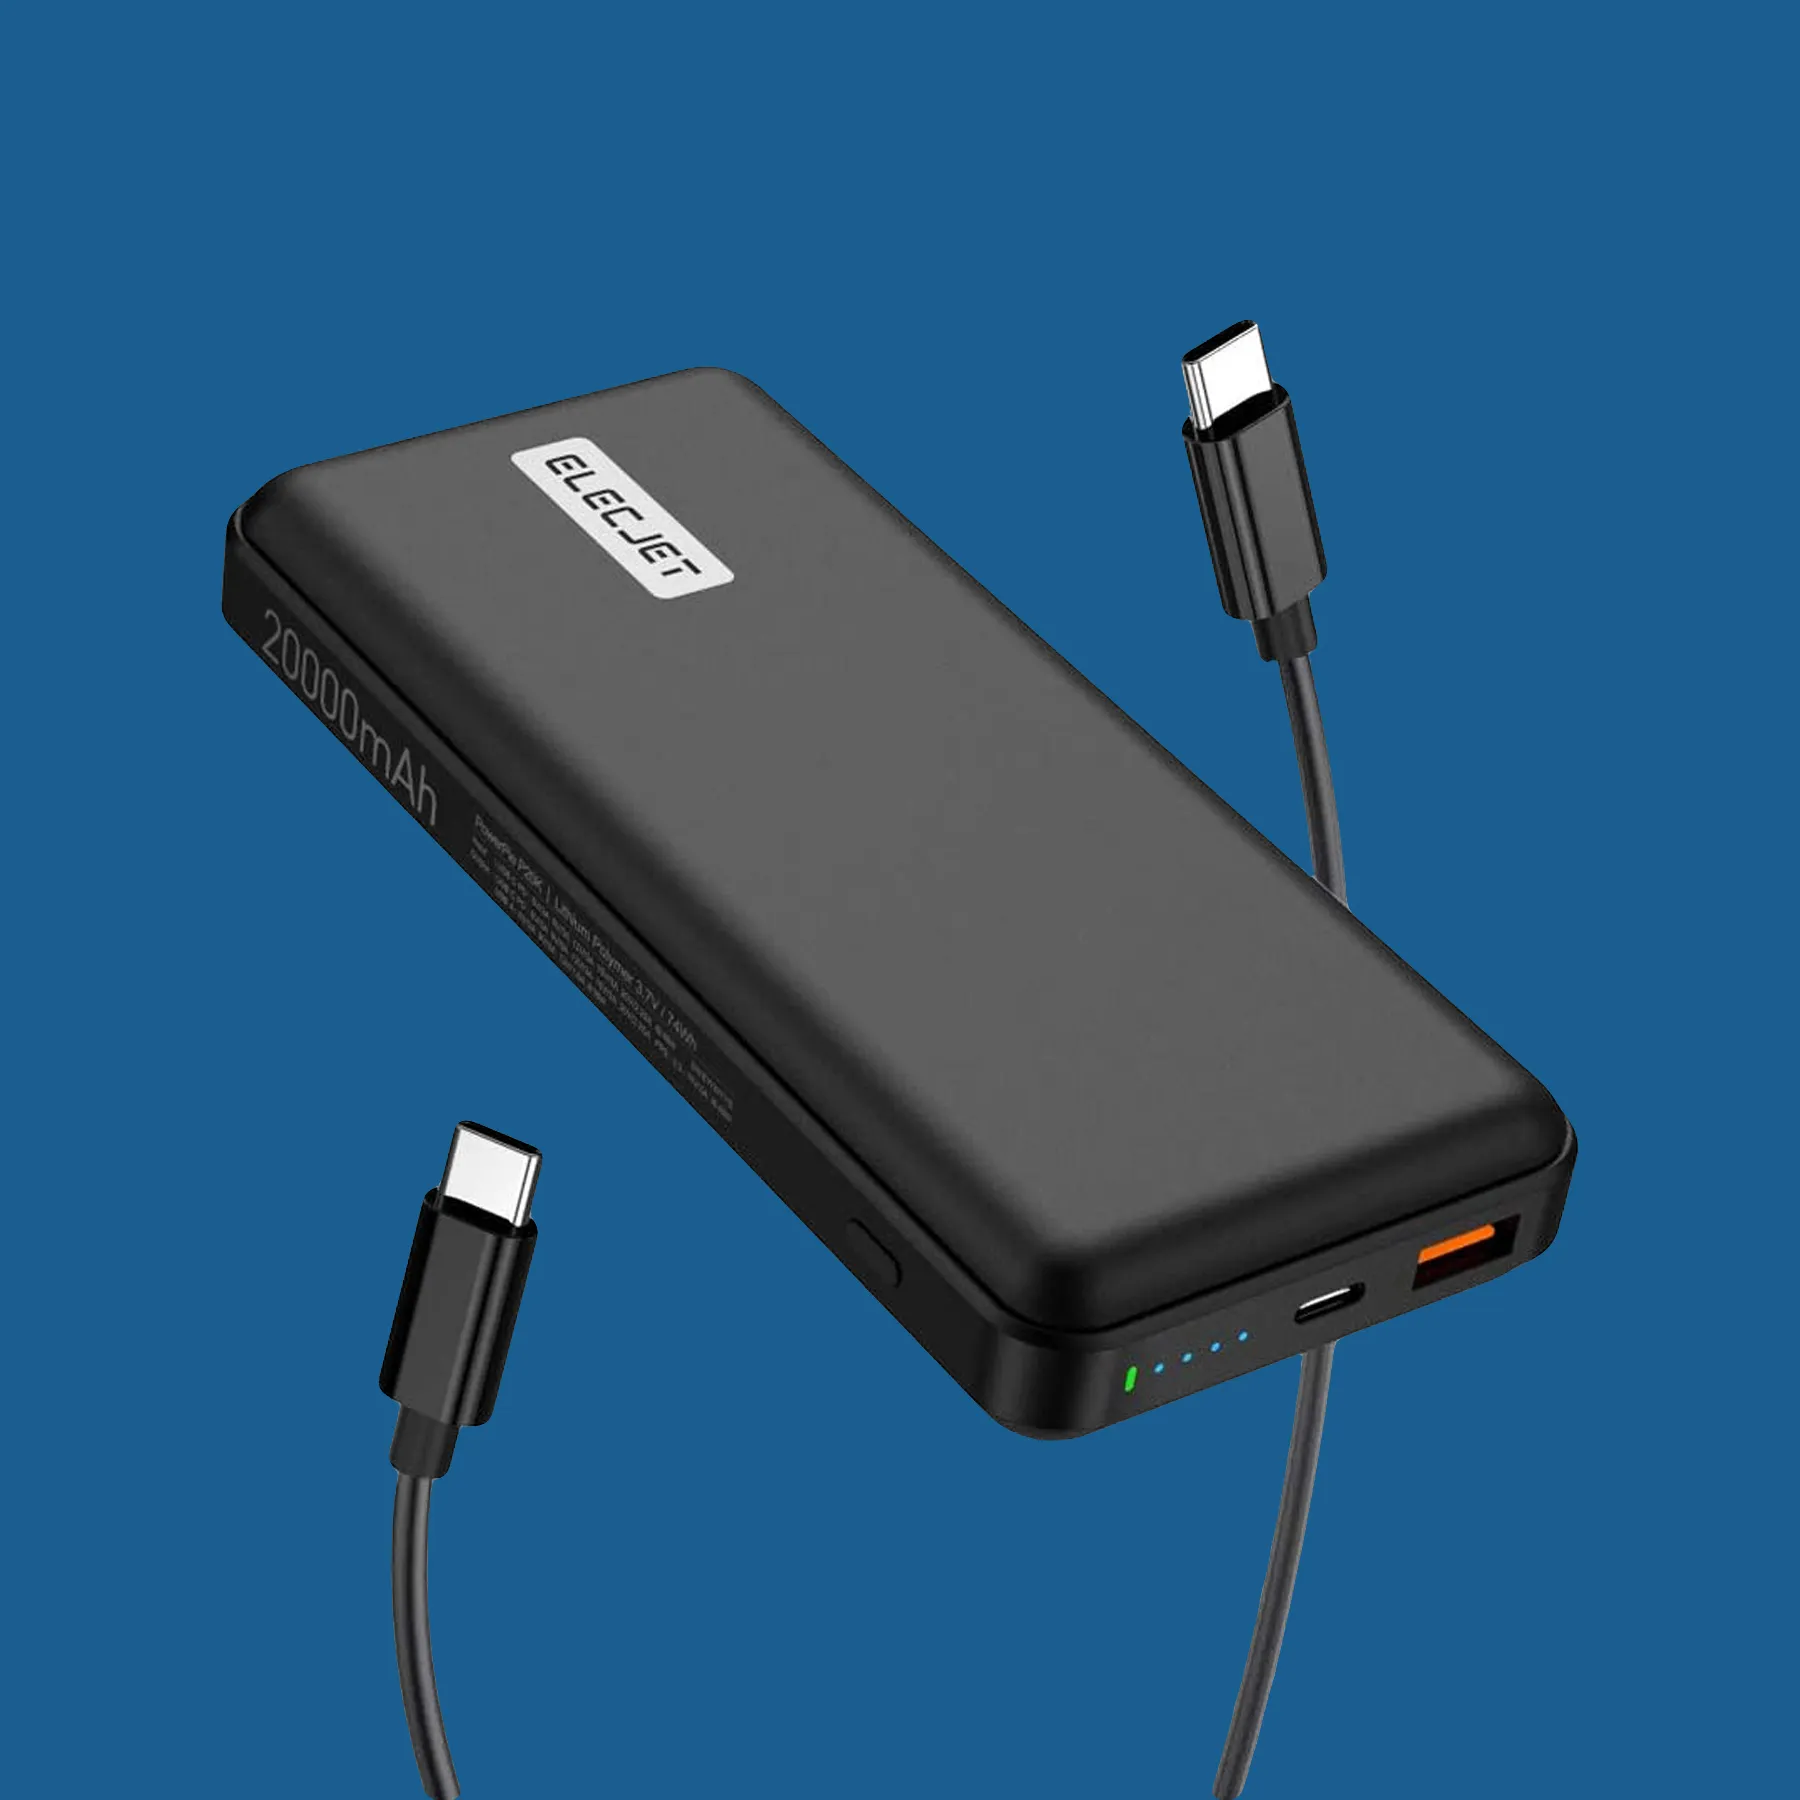 Best Portable Chargers and Power Banks to Buy for Android - The Tech ...